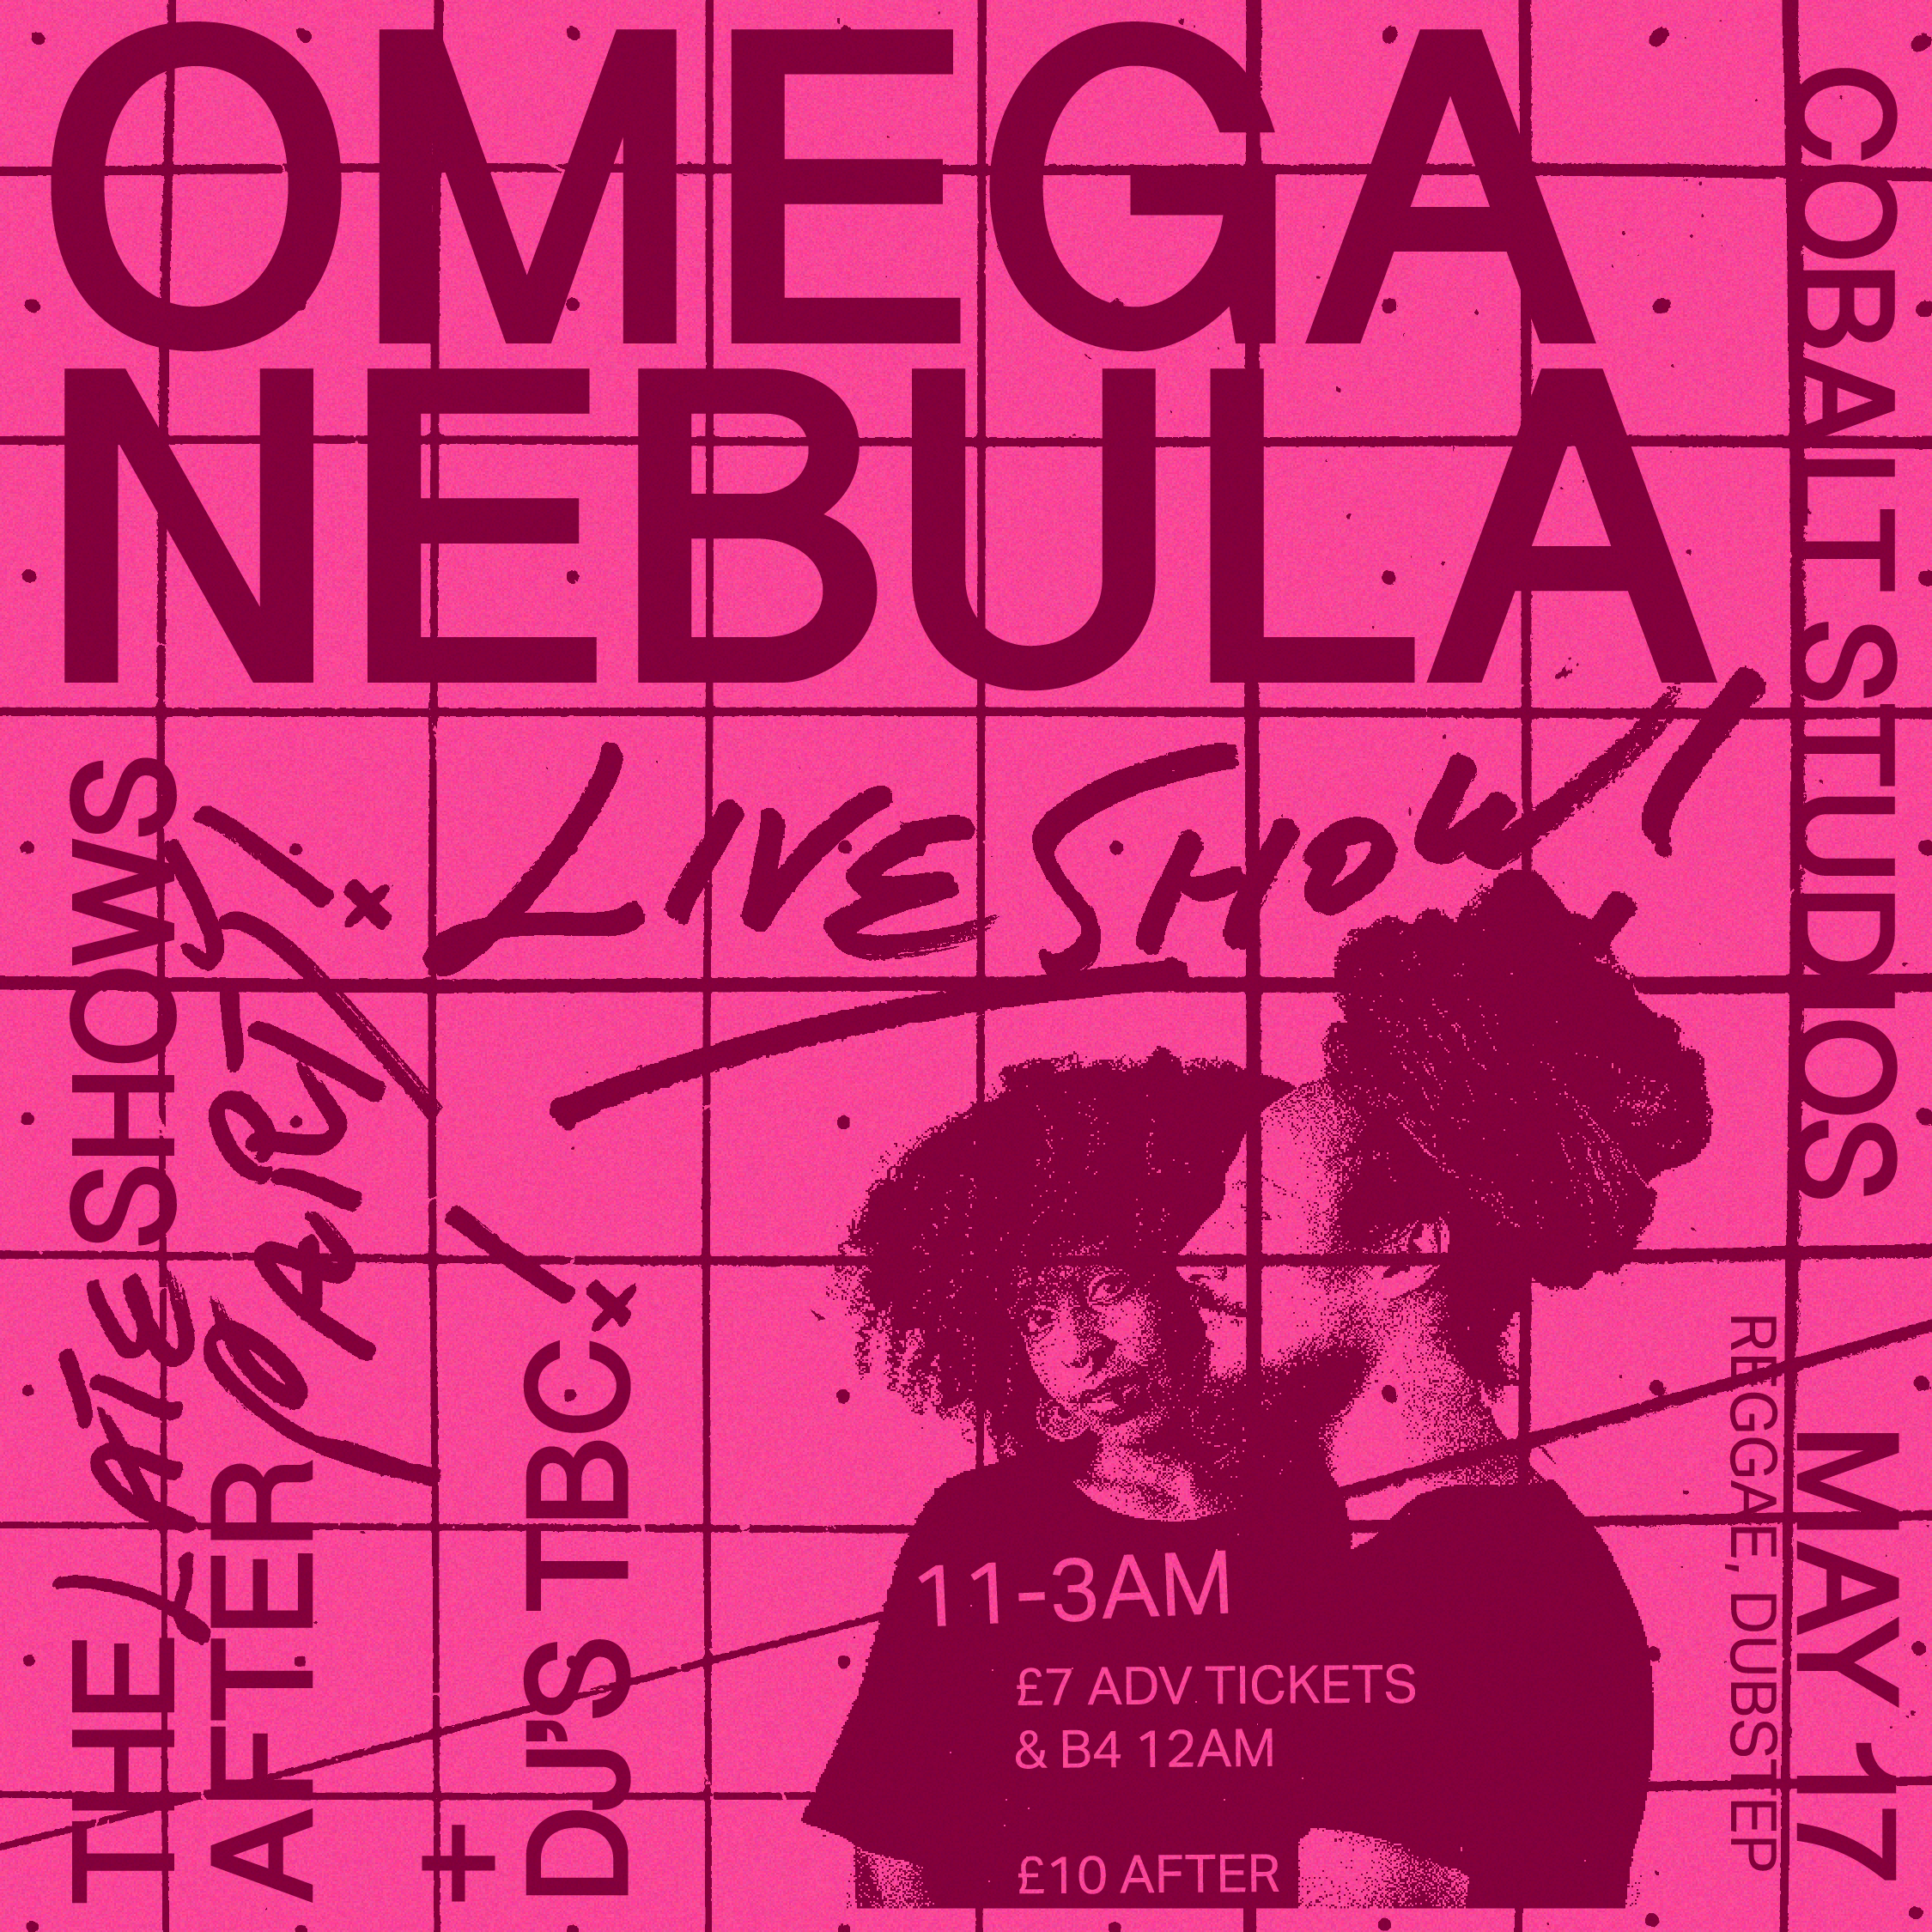 Late Shows After Party with Omega Nebula Live - Página frontal